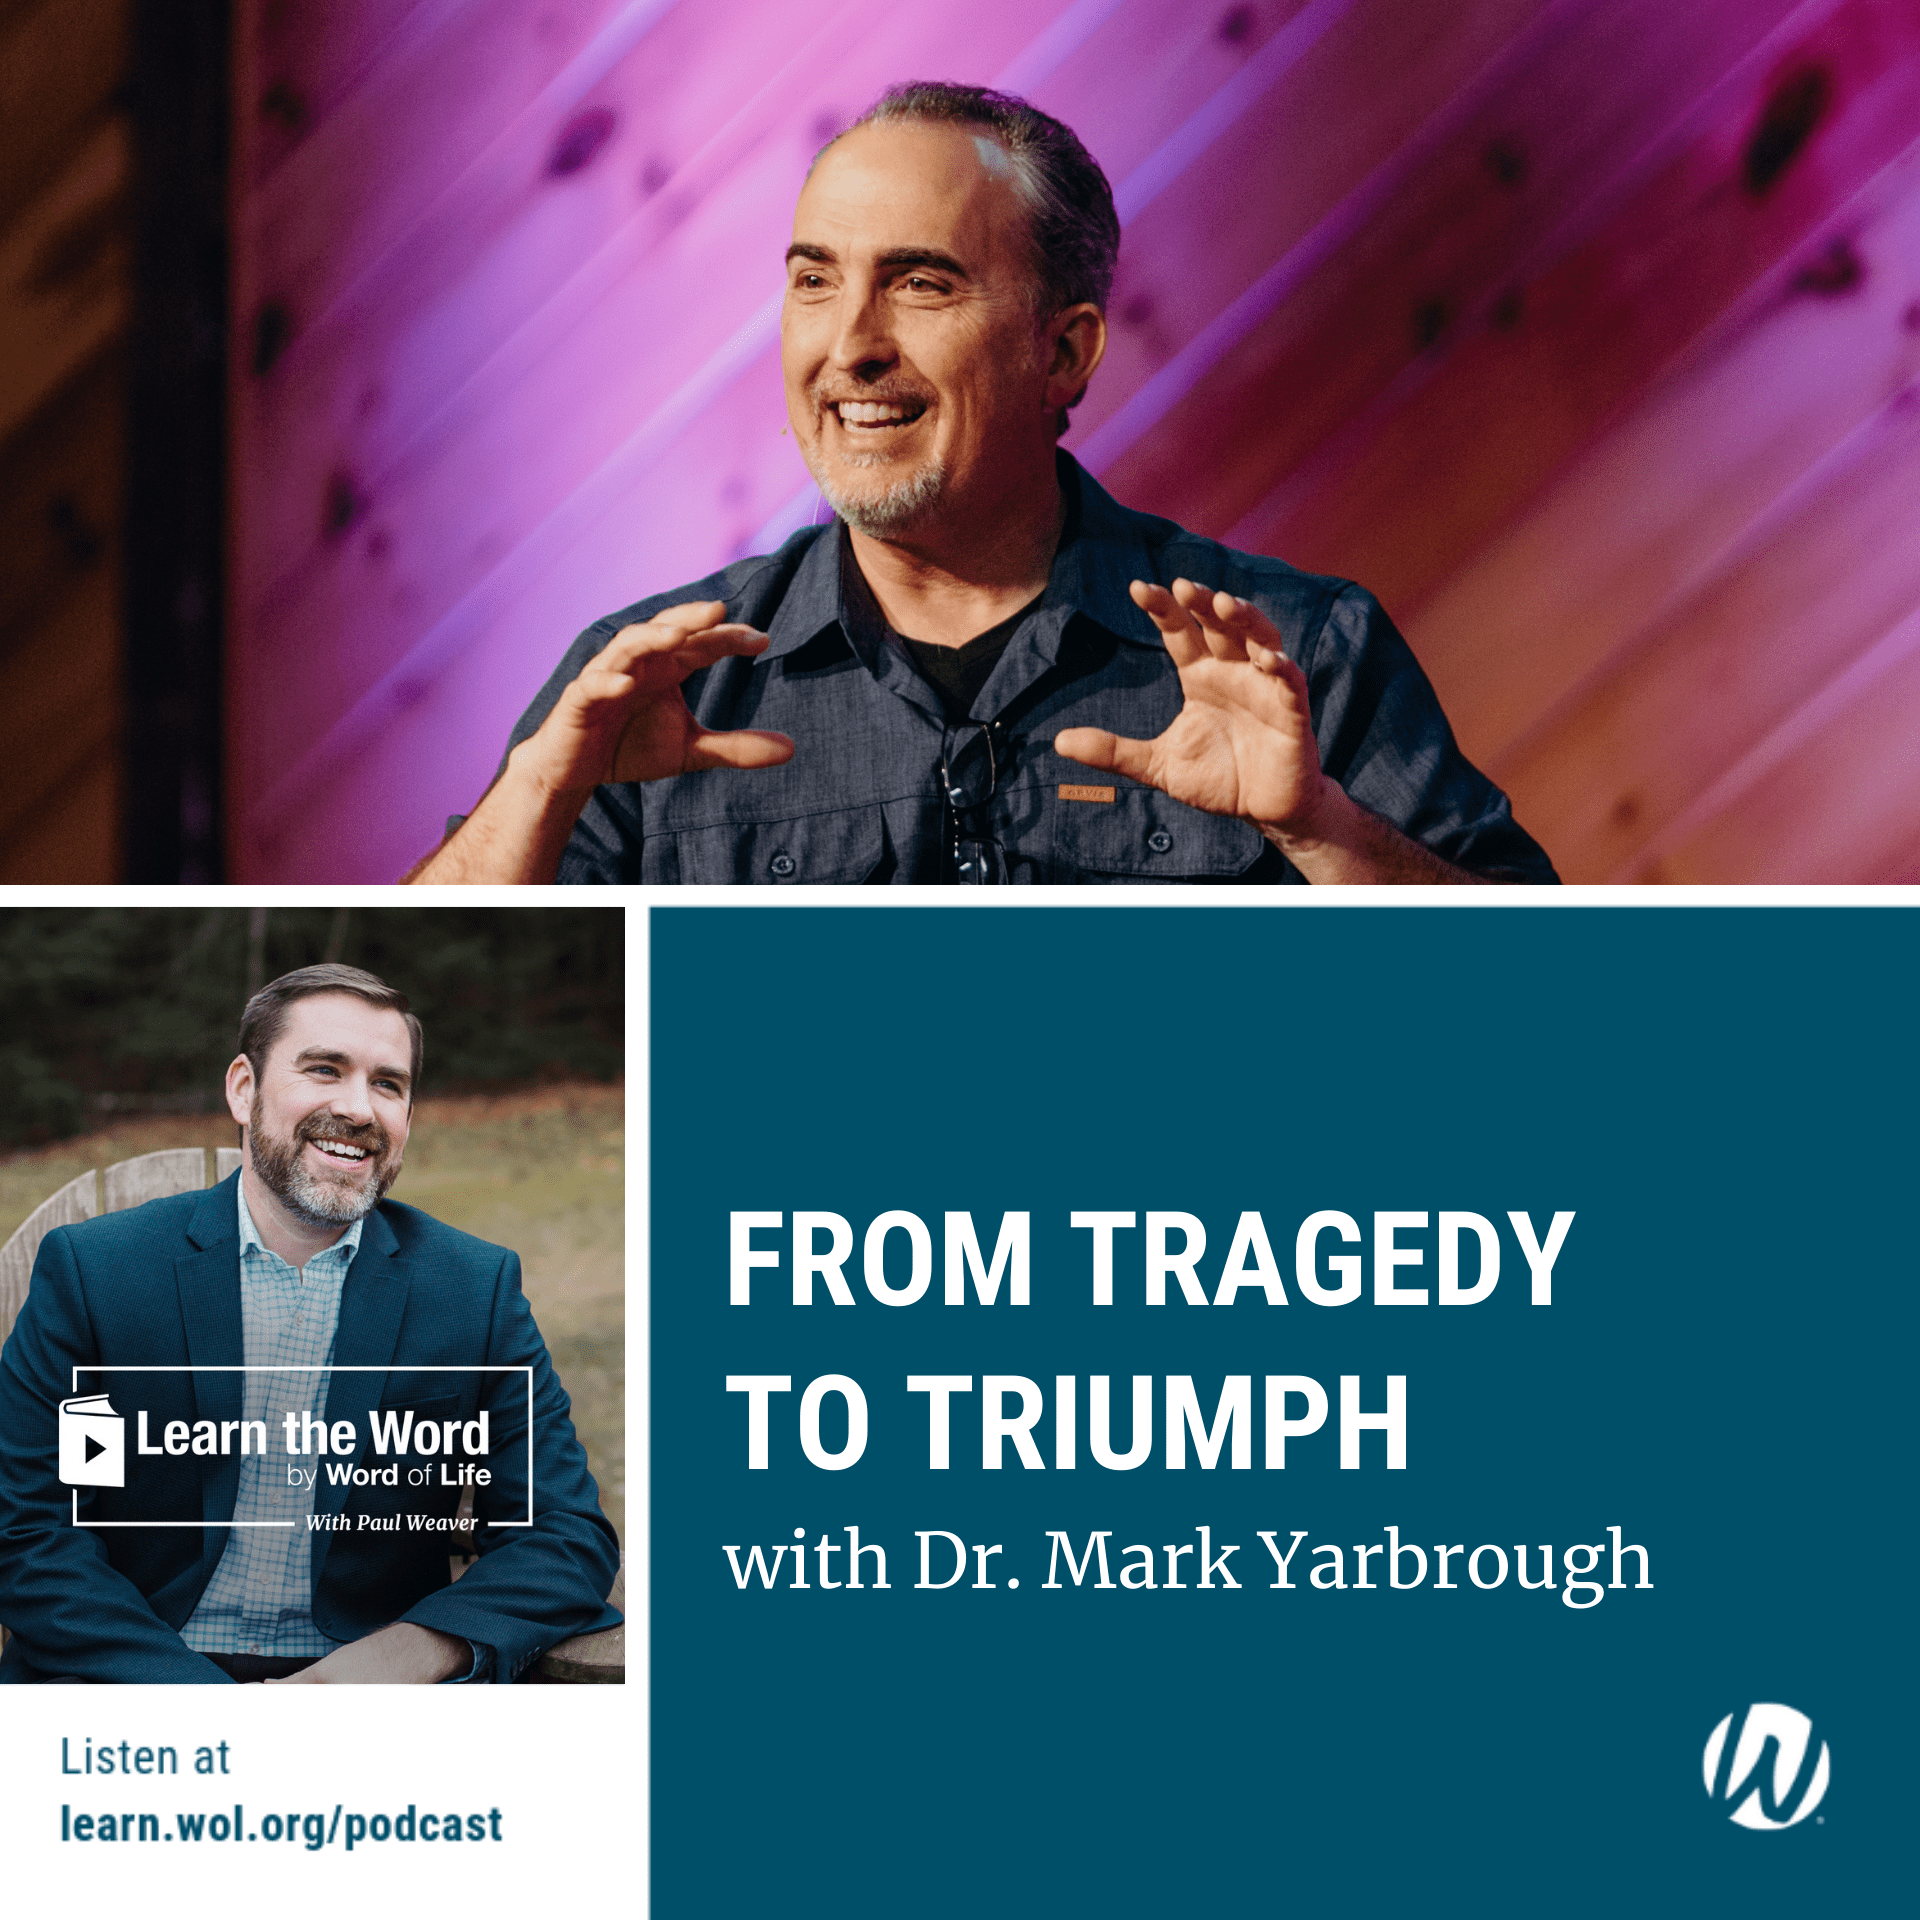 LTW196 - From Tragedy to Triumph with Dr. Mark Yarbrough